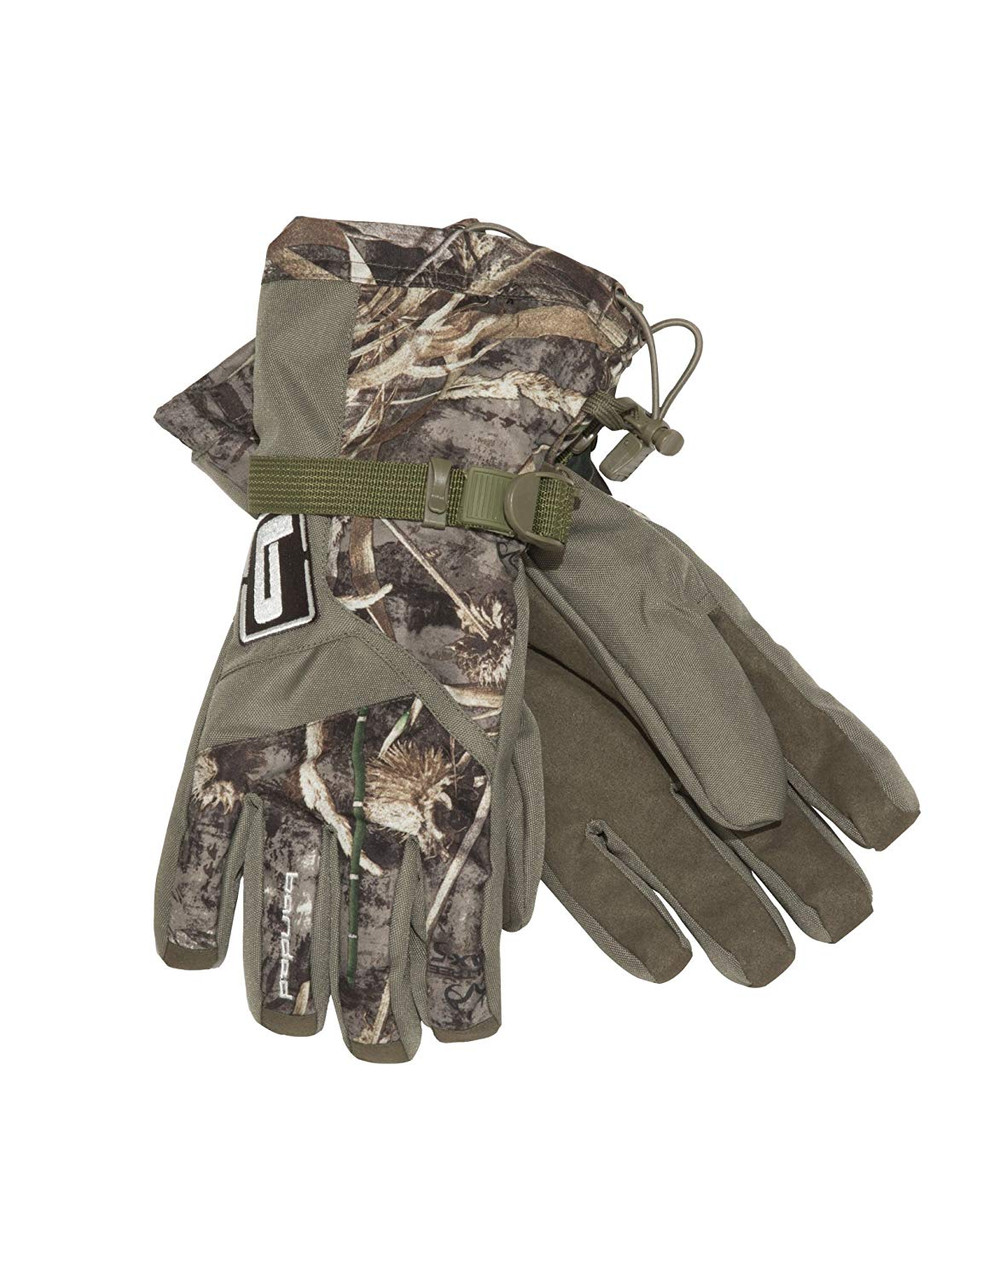 Banded White River Insulated Gloves, Max 5 Camo, Large - B03047